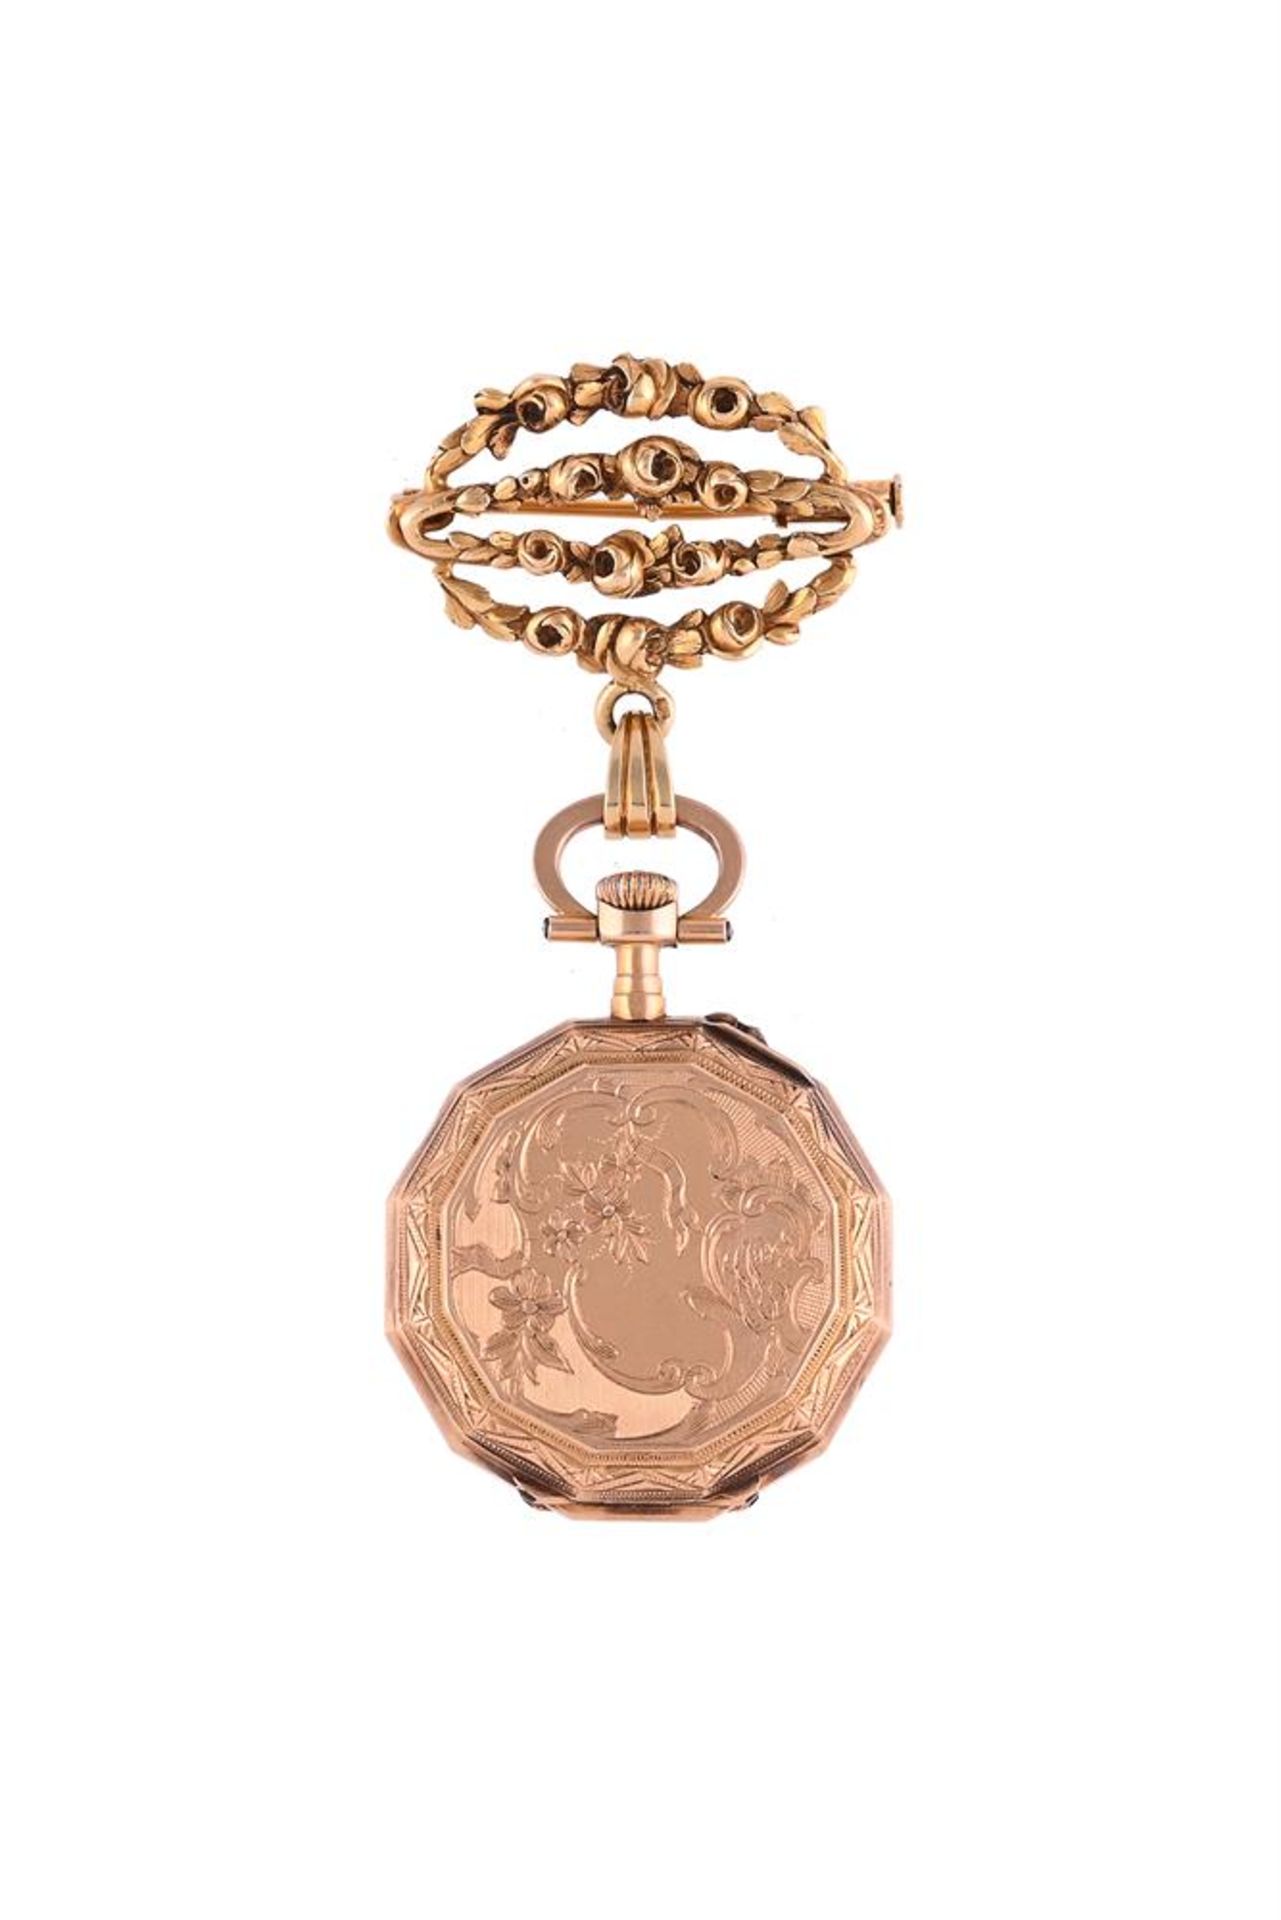 UNSIGNED, A FRENCH GOLD COLOURED KEYLESS WIND OPEN FACE FOB WATCH - Image 2 of 3